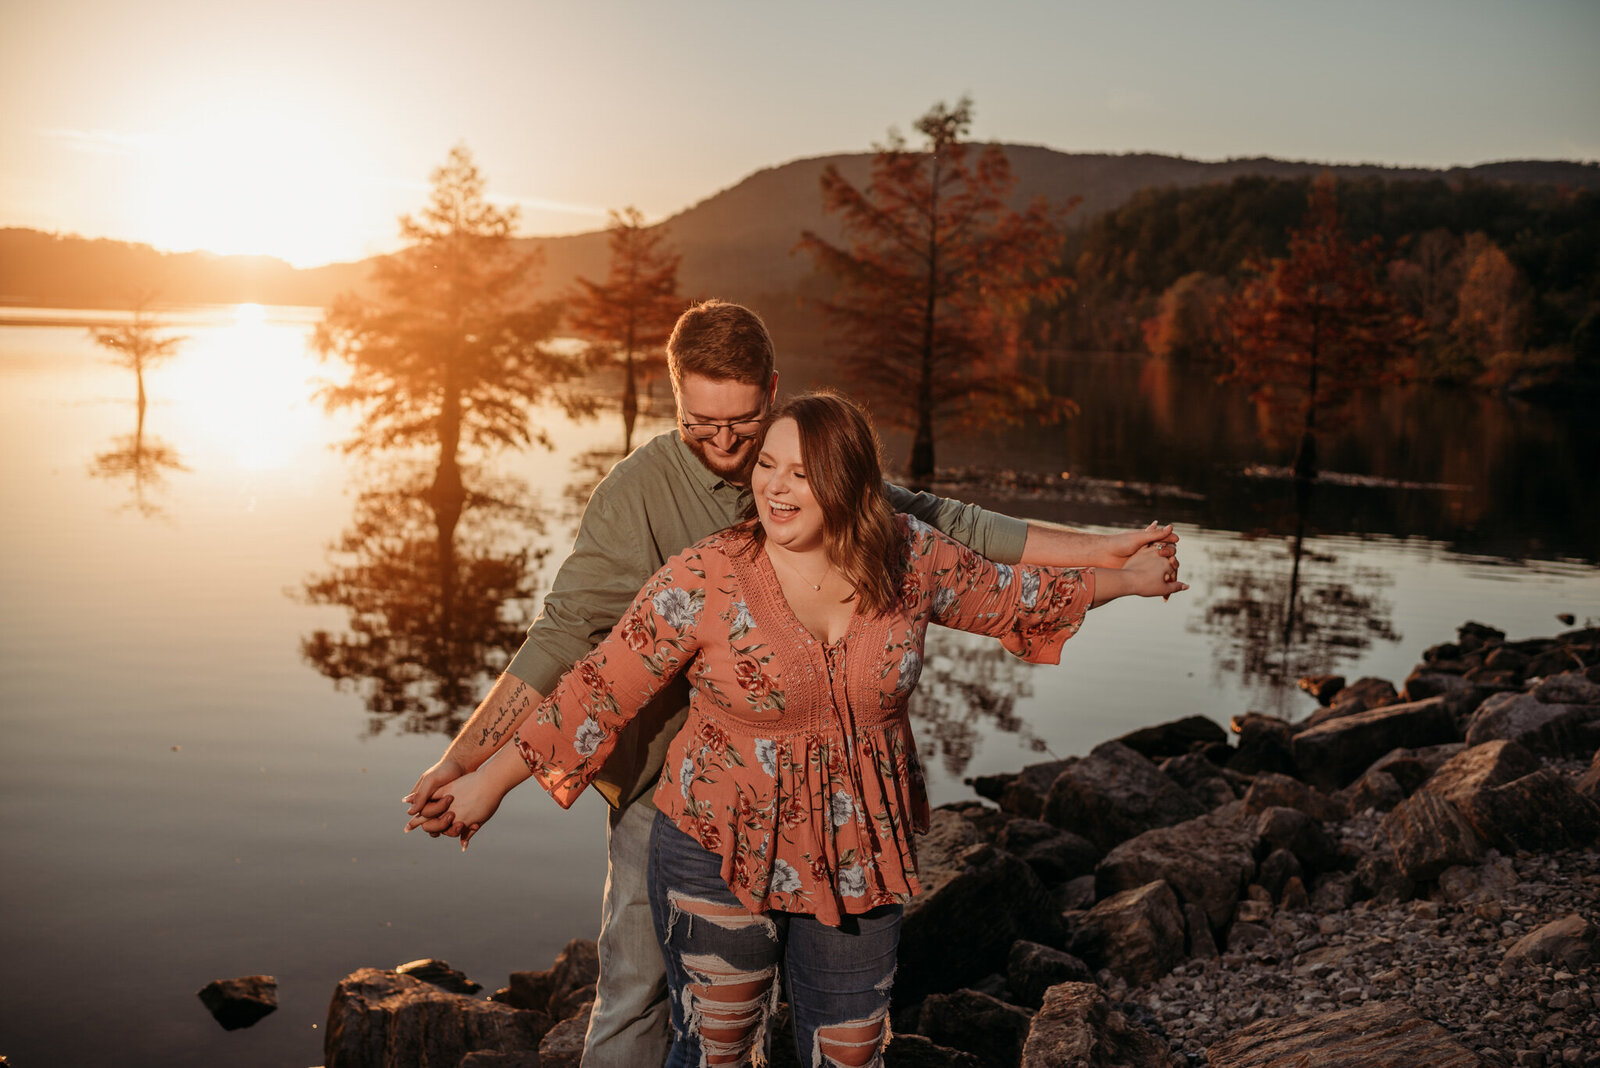 photo of man and woman waving their arms in front of a pond